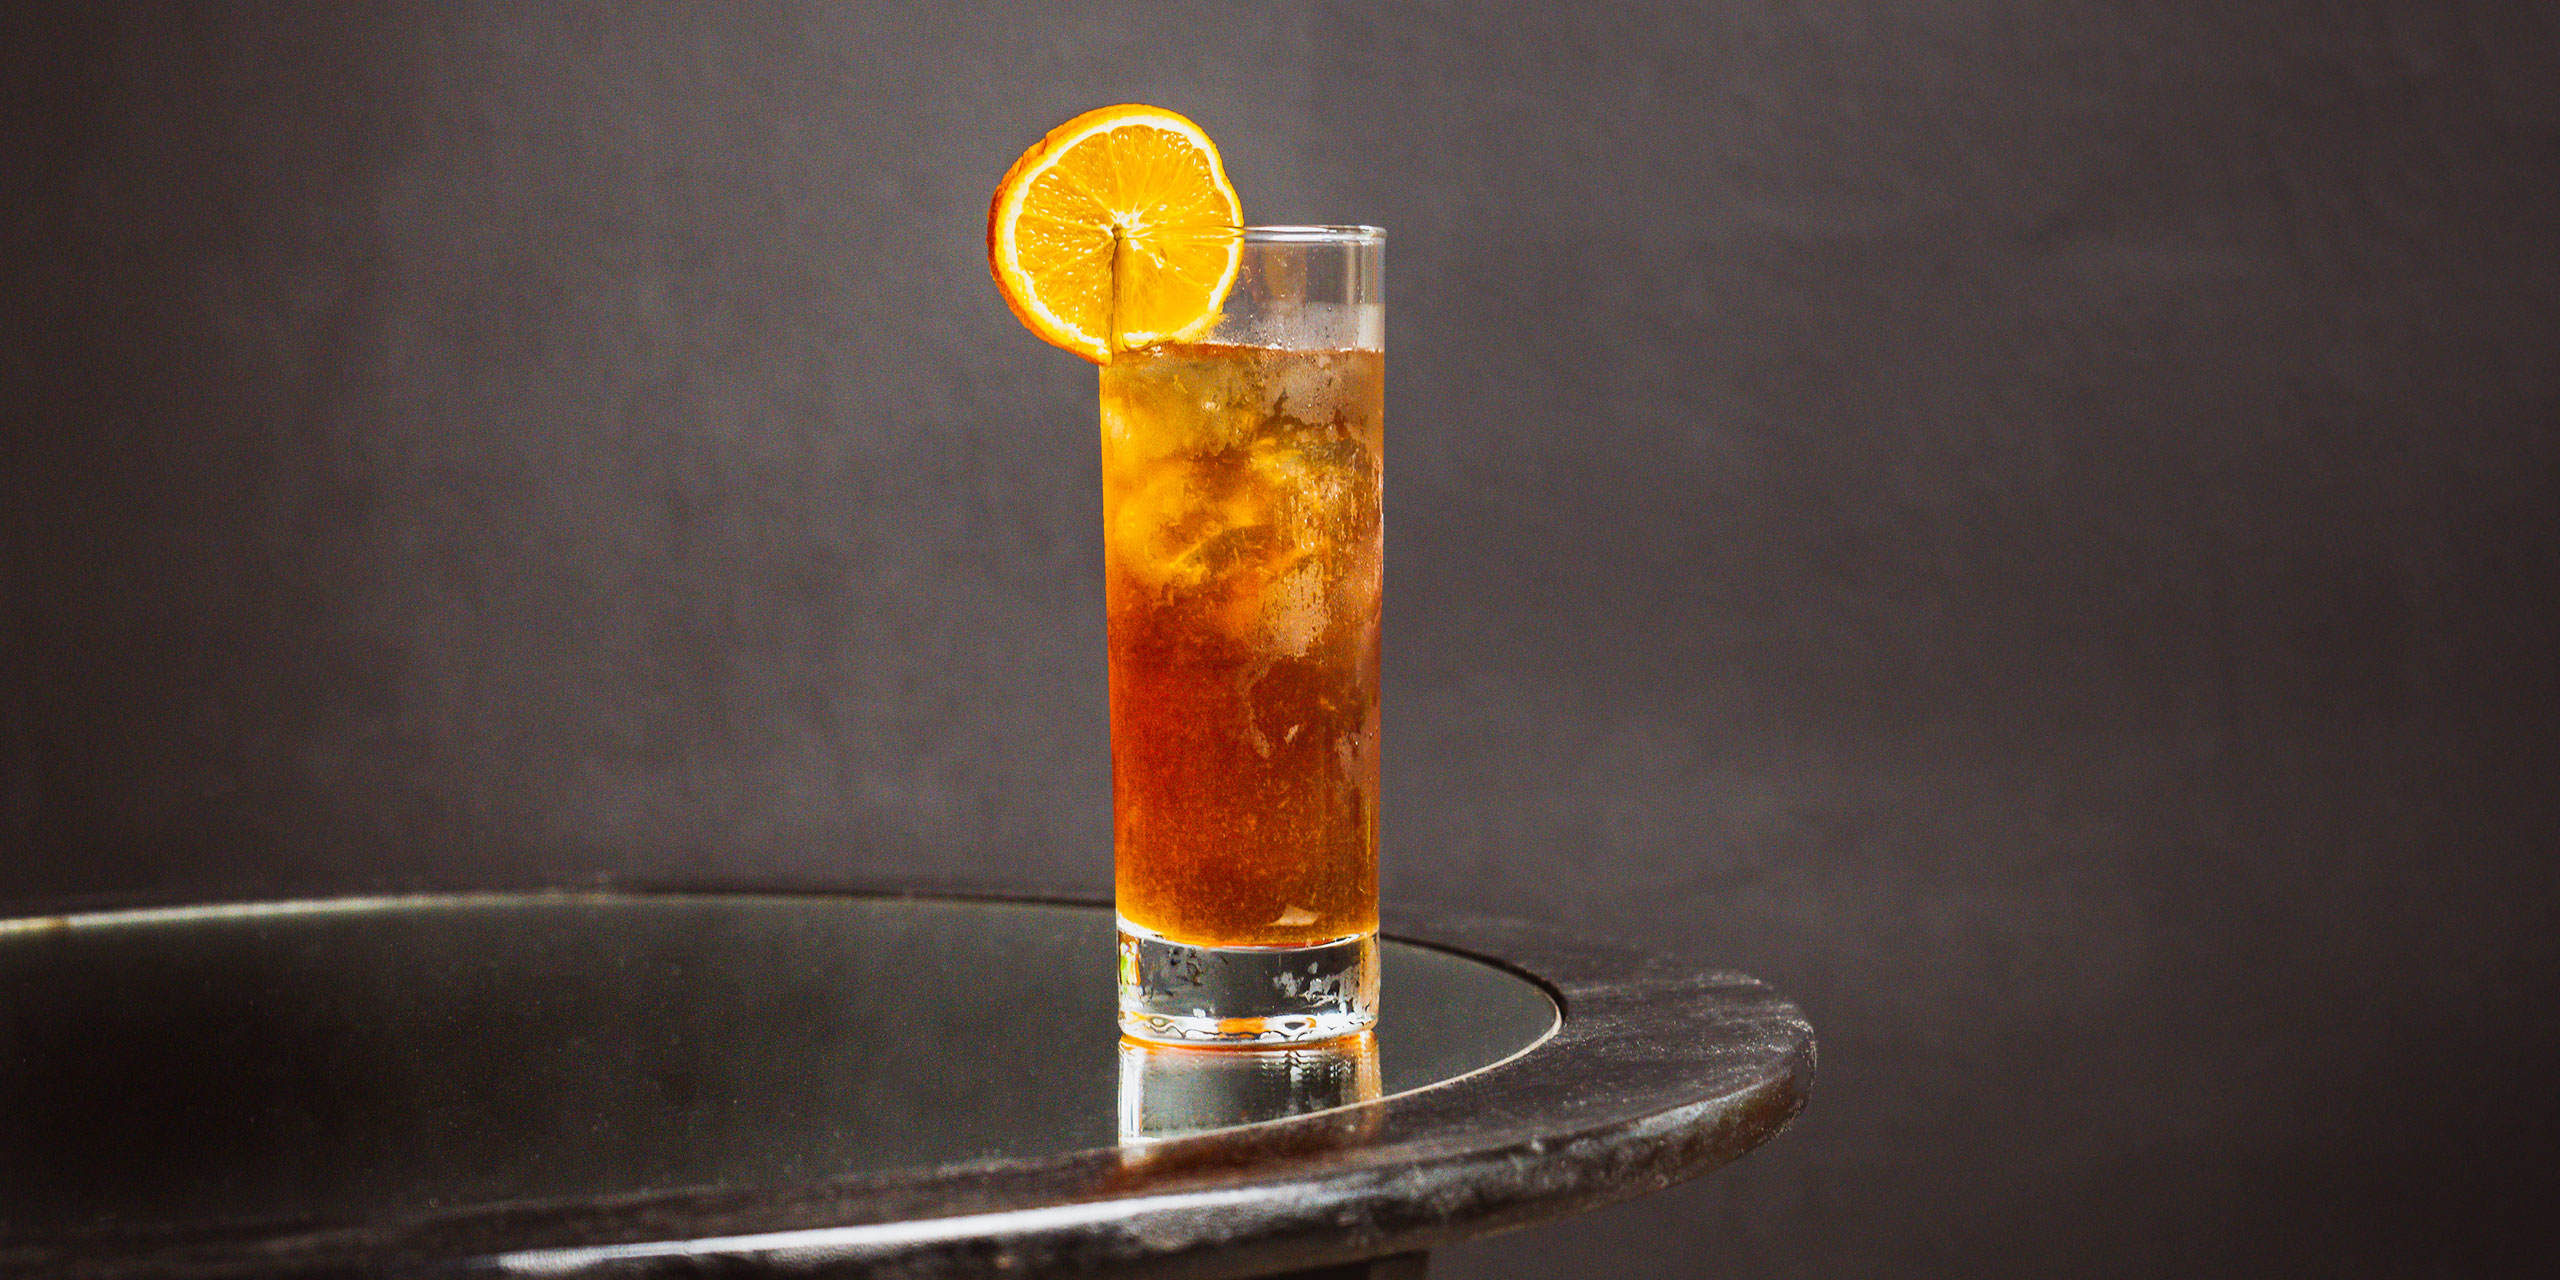 Vermouth Swizzle with an orange garnish on a mirrored table